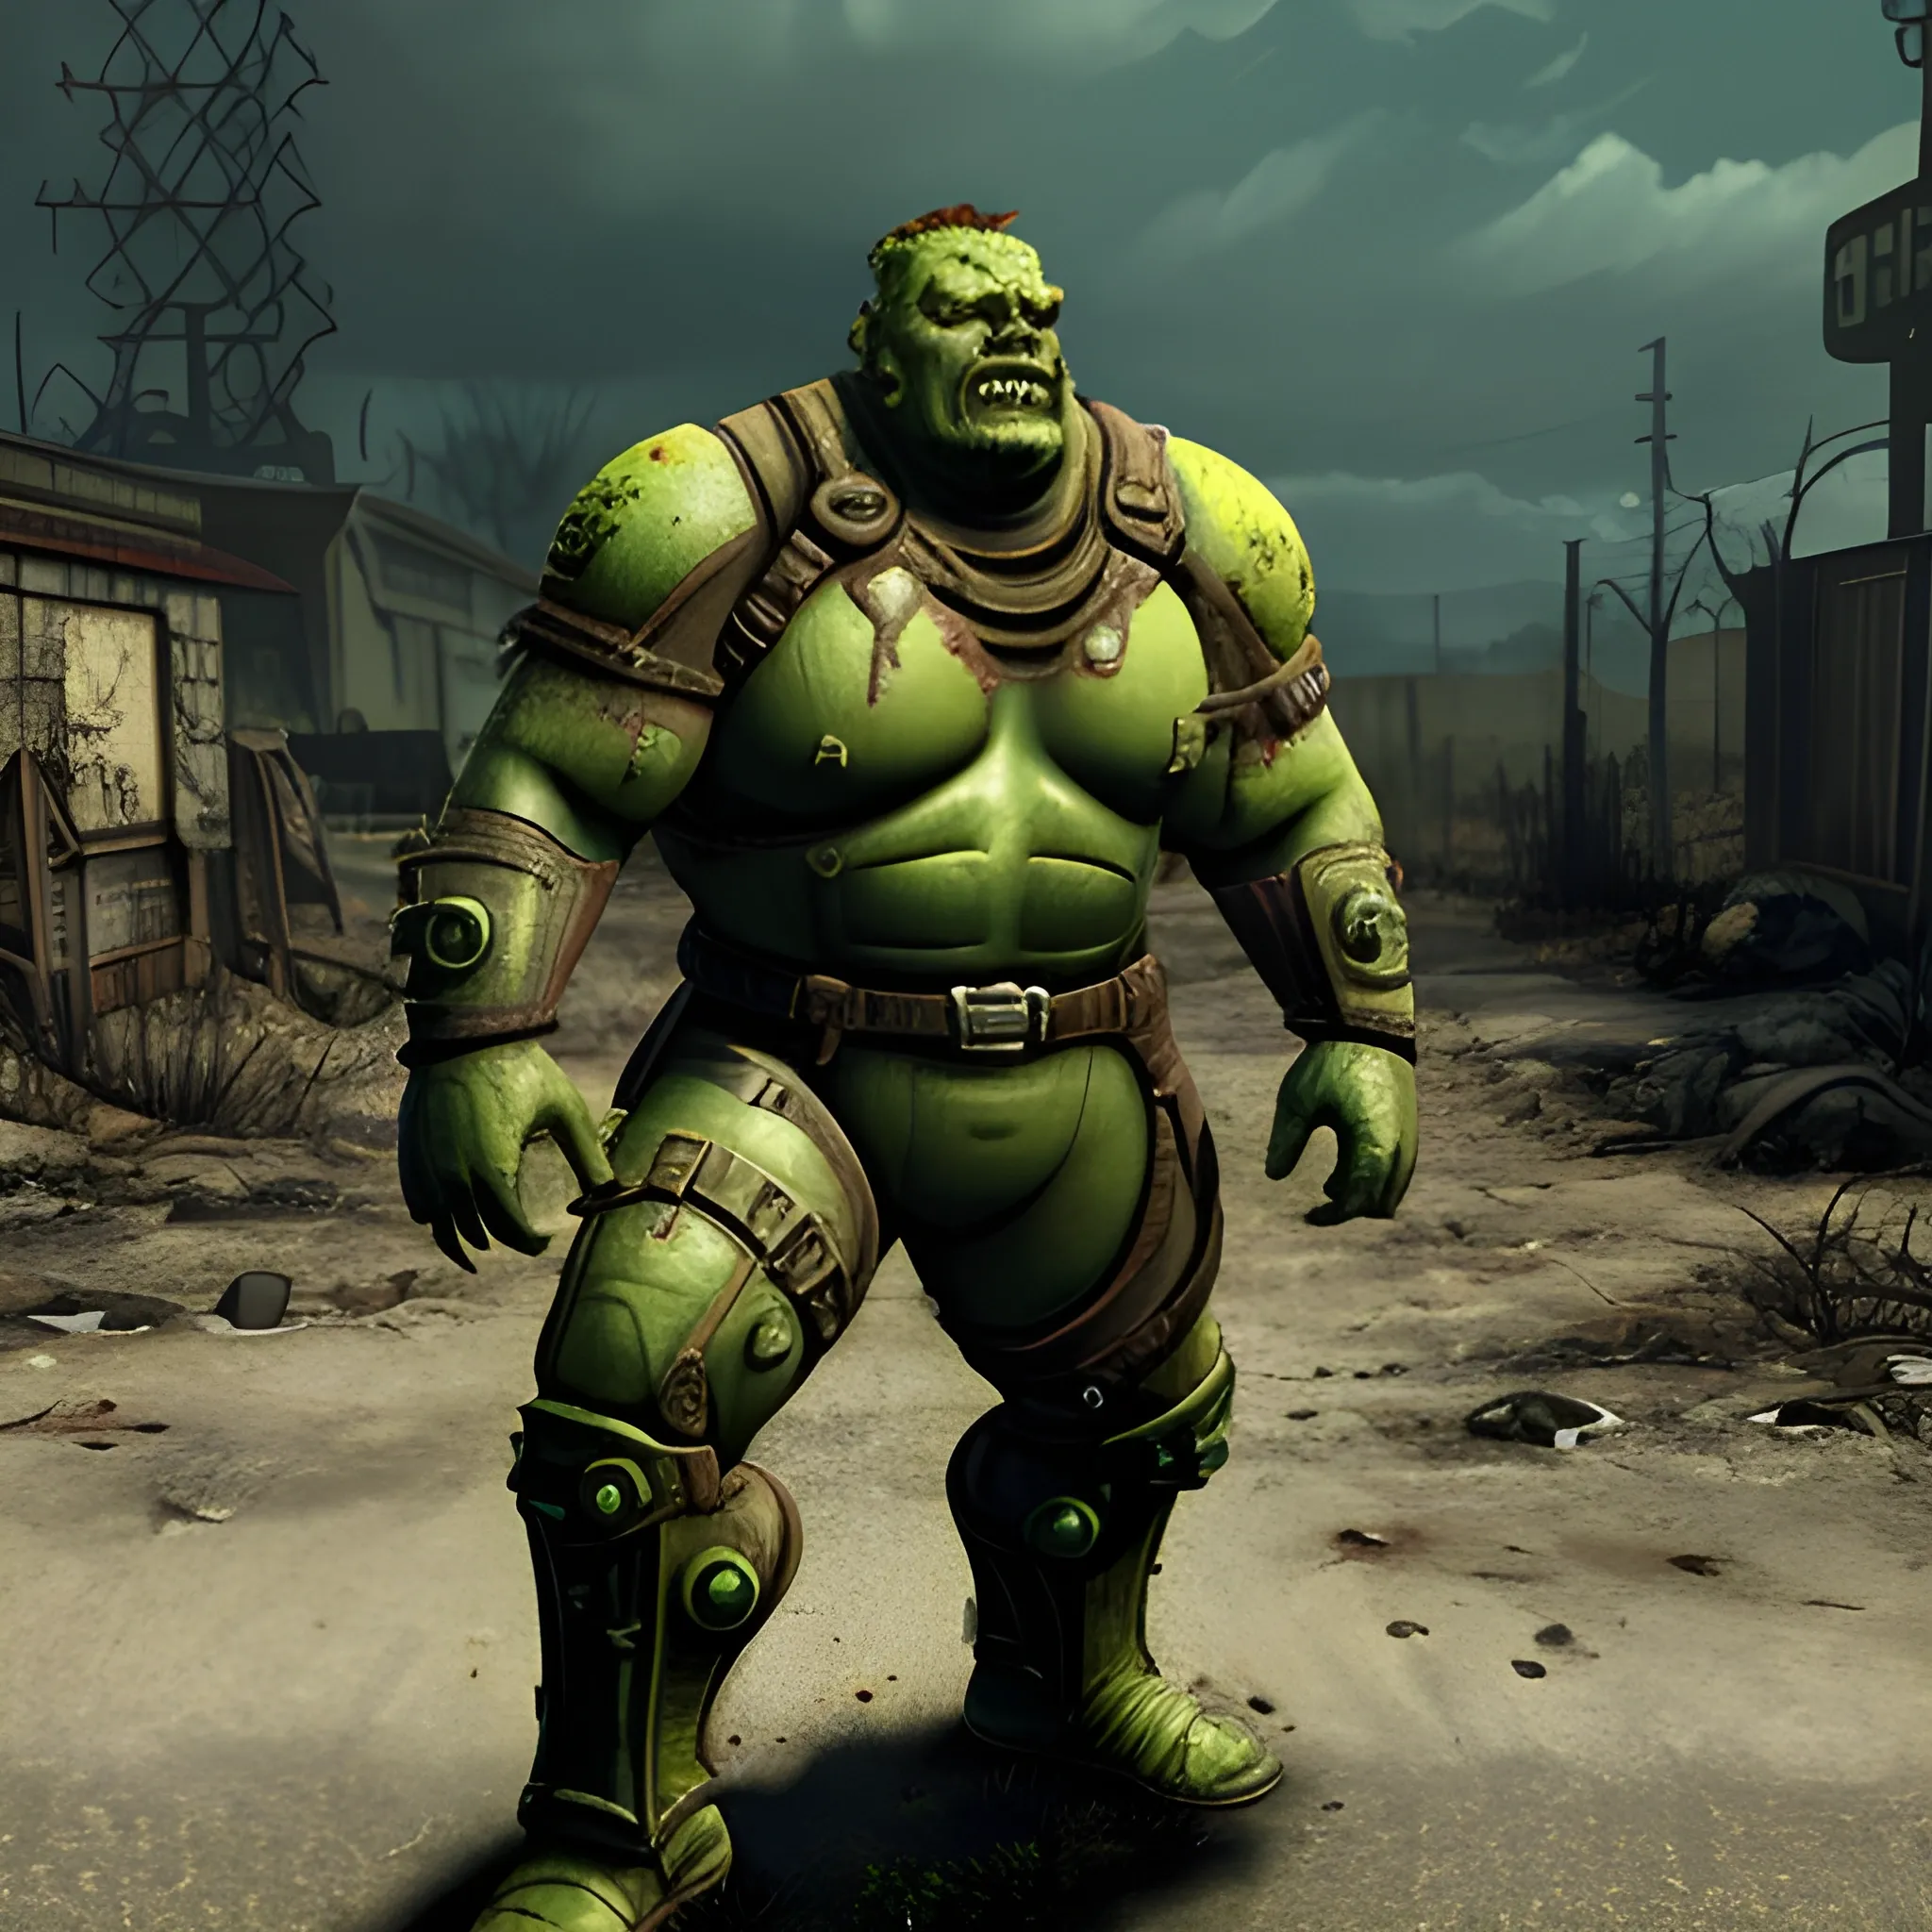 in the style of Fallout 4 masterpiece,  fallout supermutant with mutated face and green skin wearing scavenged armor, full body